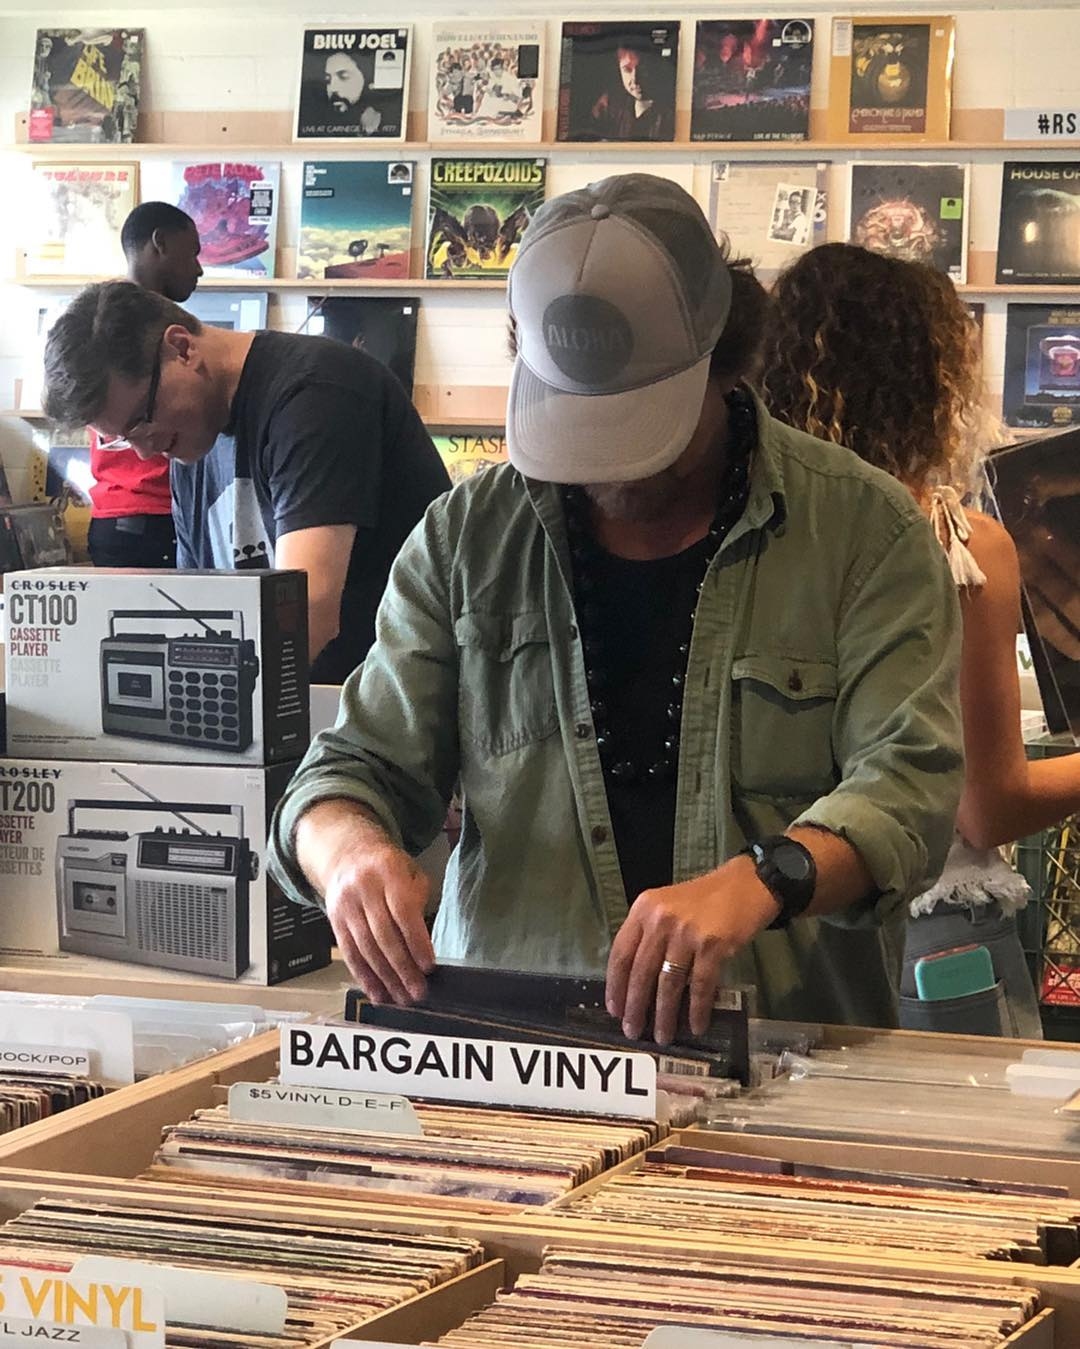 Eddie Vedder in Chicago visiting a music store and getting interviewed by a radio station